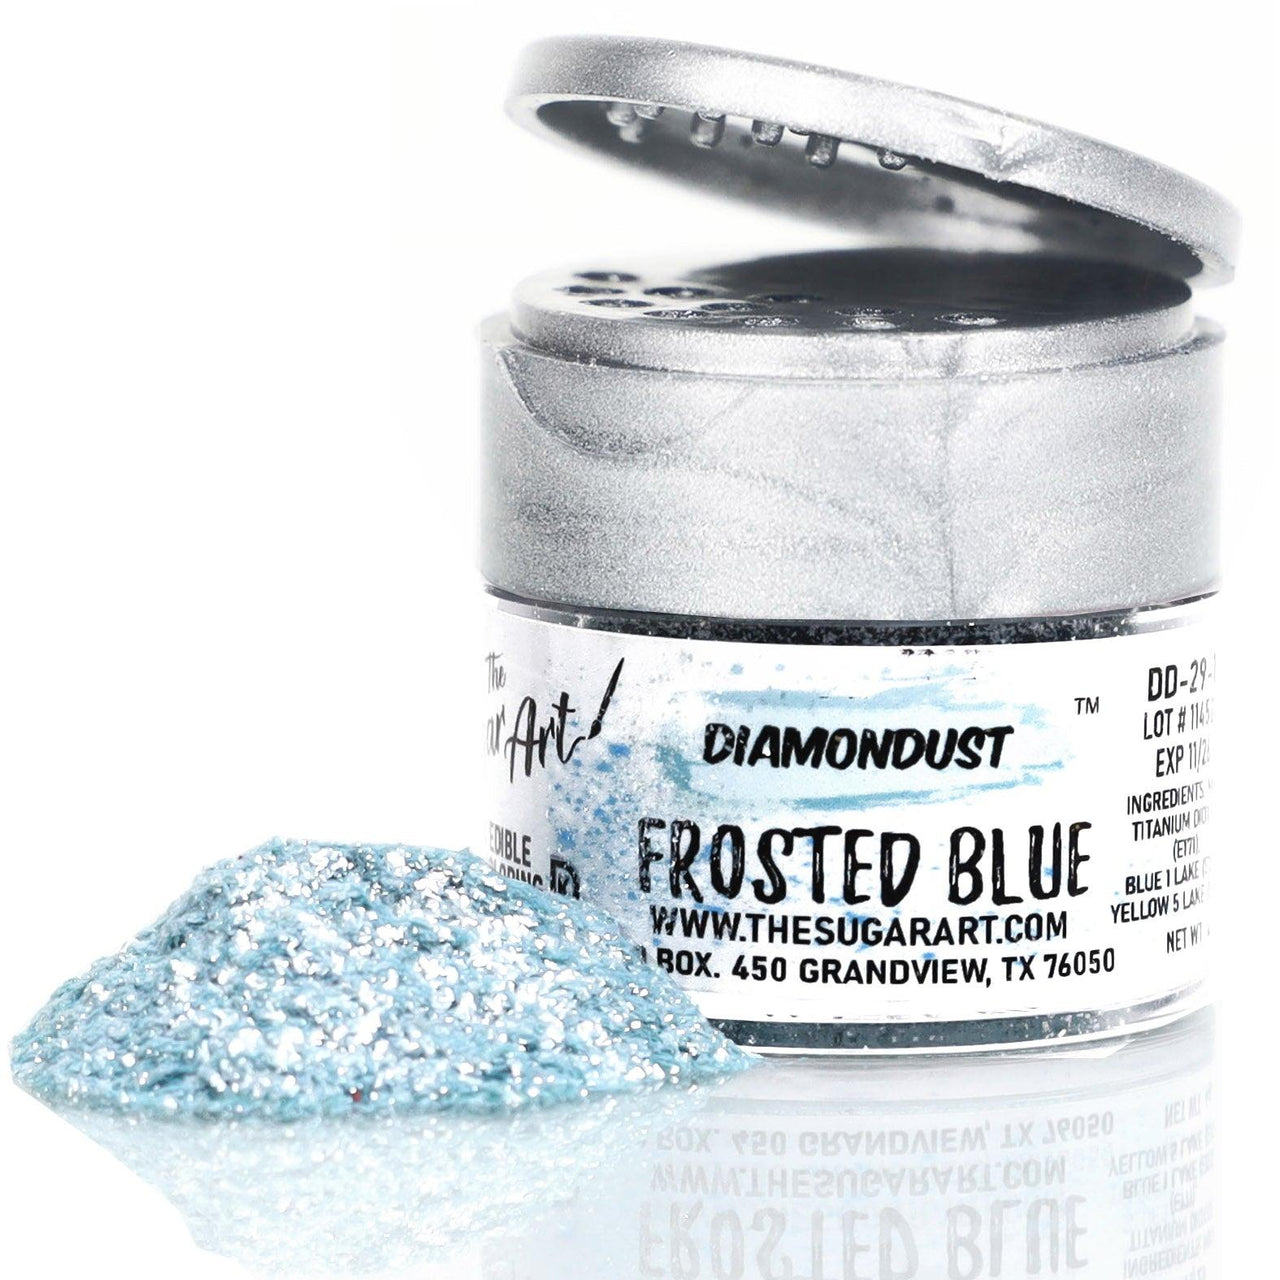 The Sugar Art - DiamonDust - Edible Glitter For Decorating Cakes, Cupcakes & More - Kosher, Food-Grade Coloring - Frosted Blue - 3 grams - ViaCheff.com